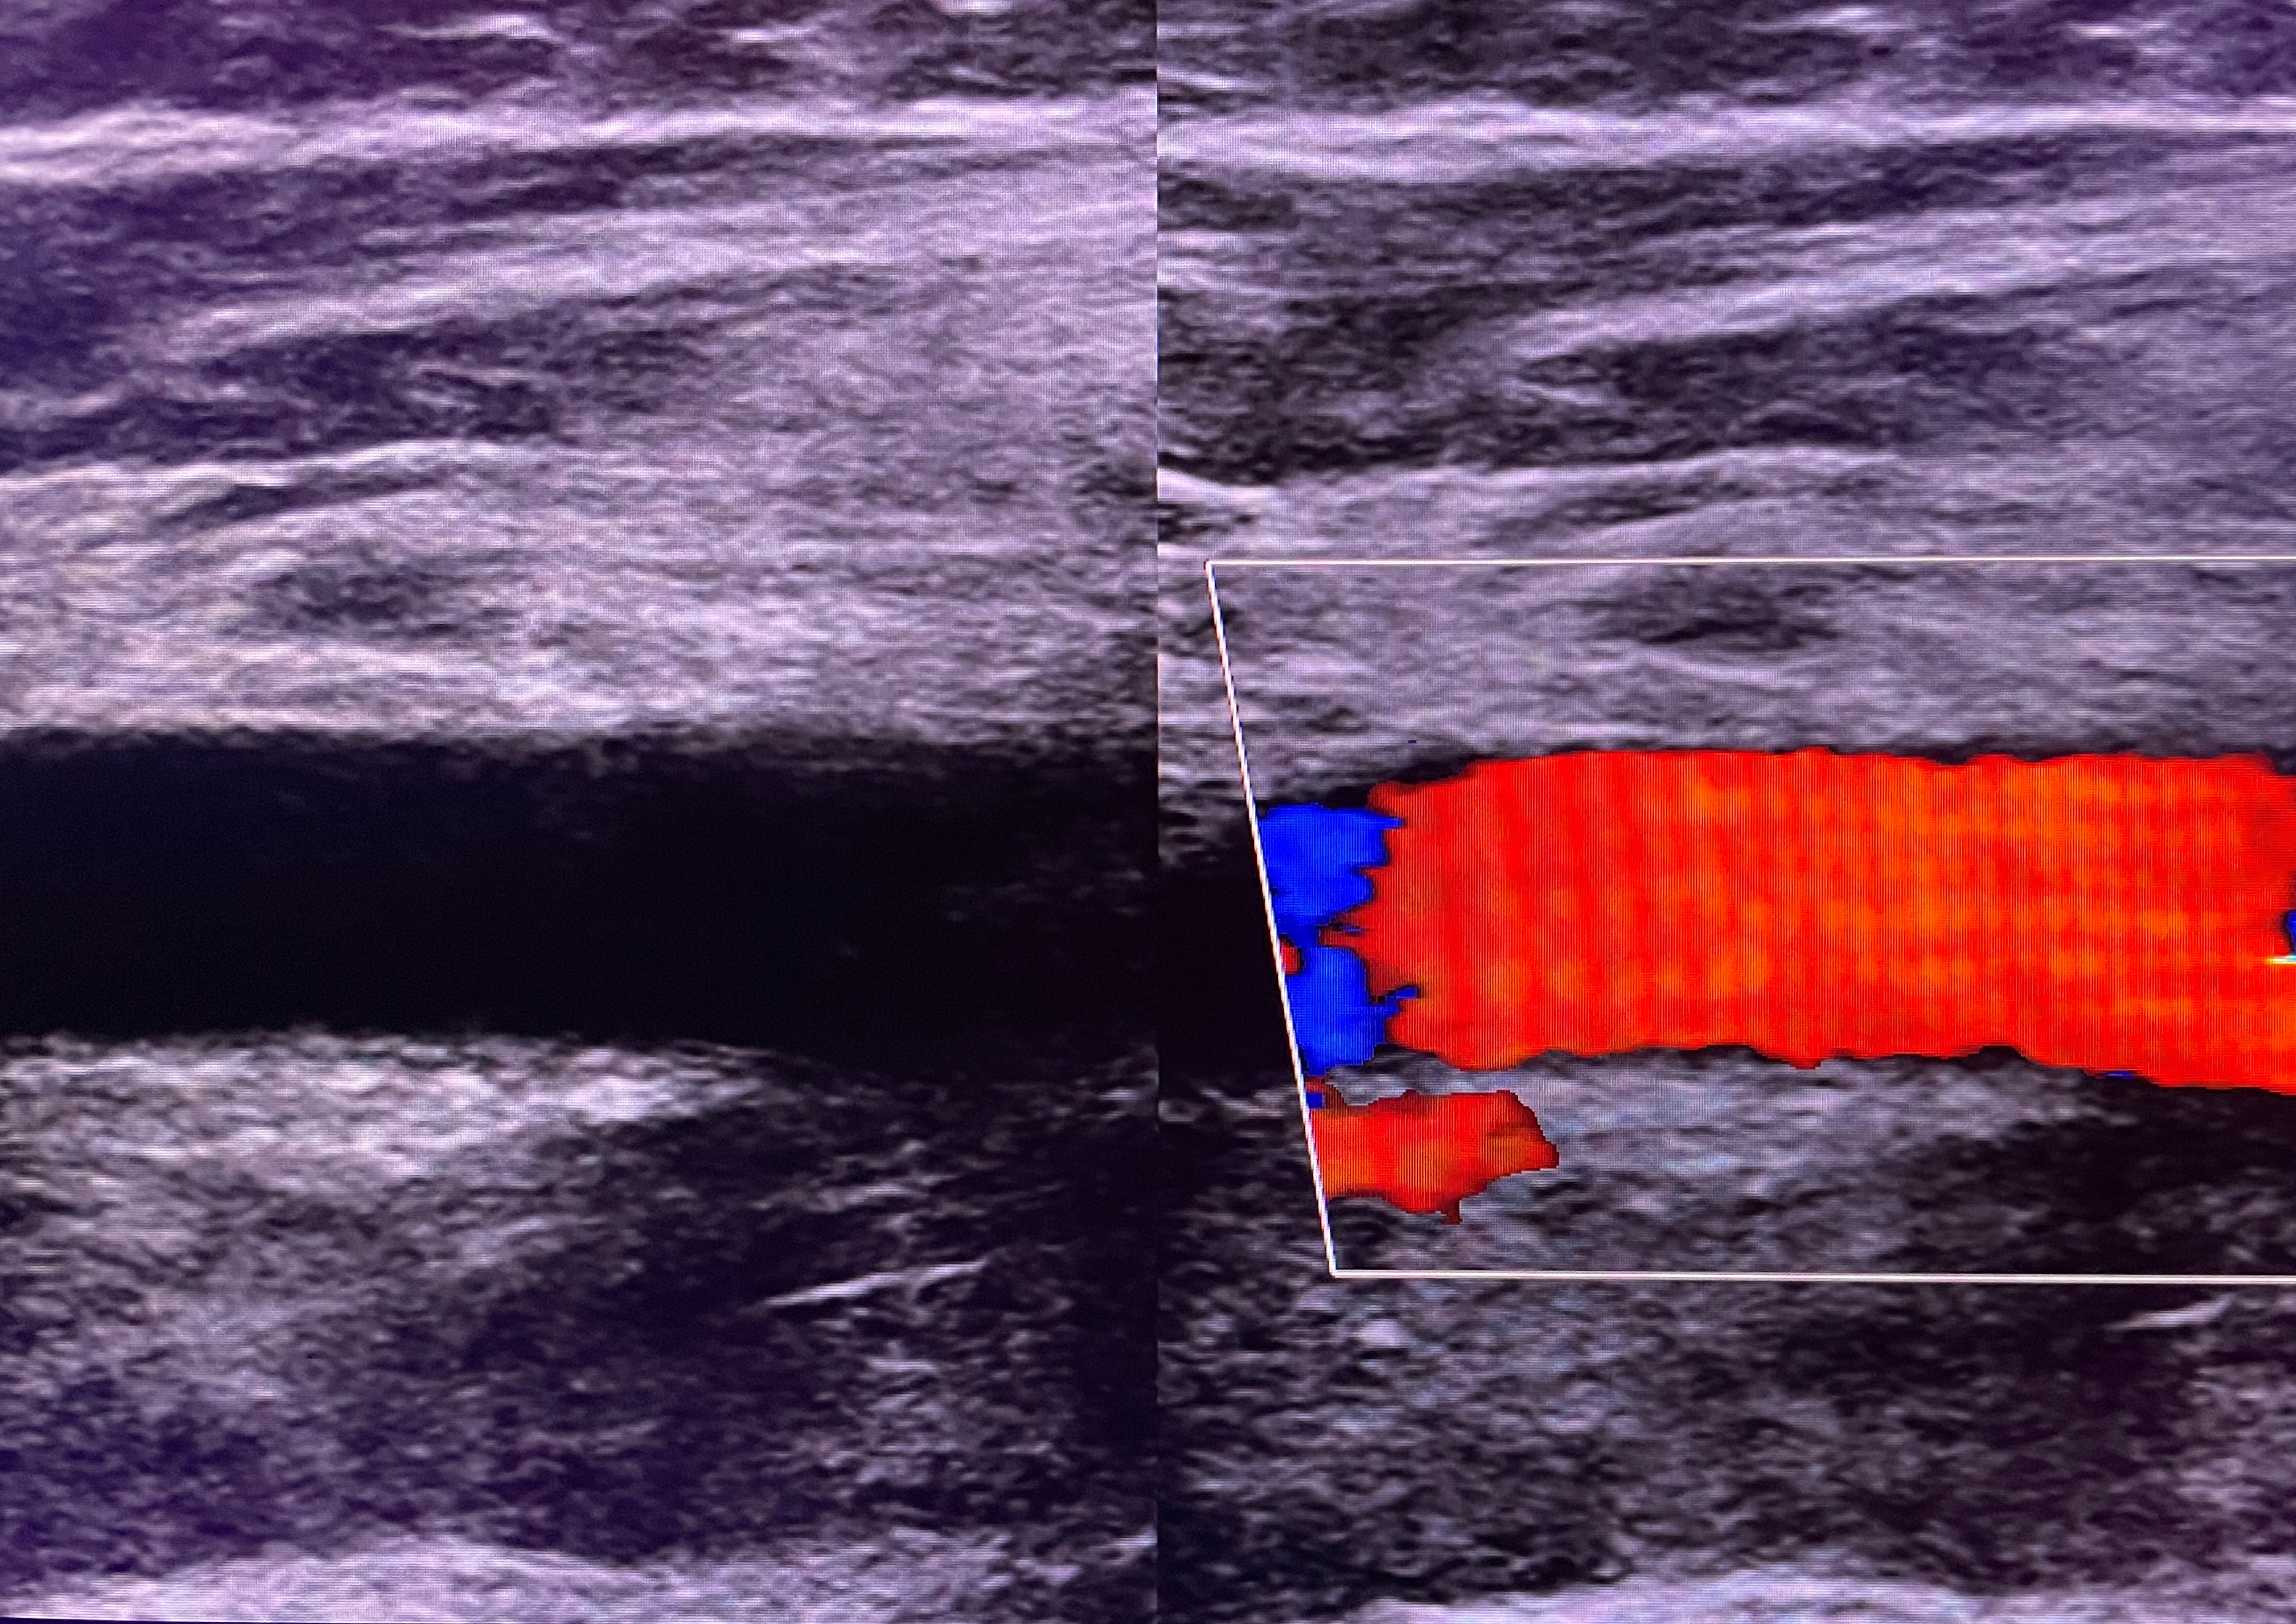 Extremity artery parameter ultrasound image